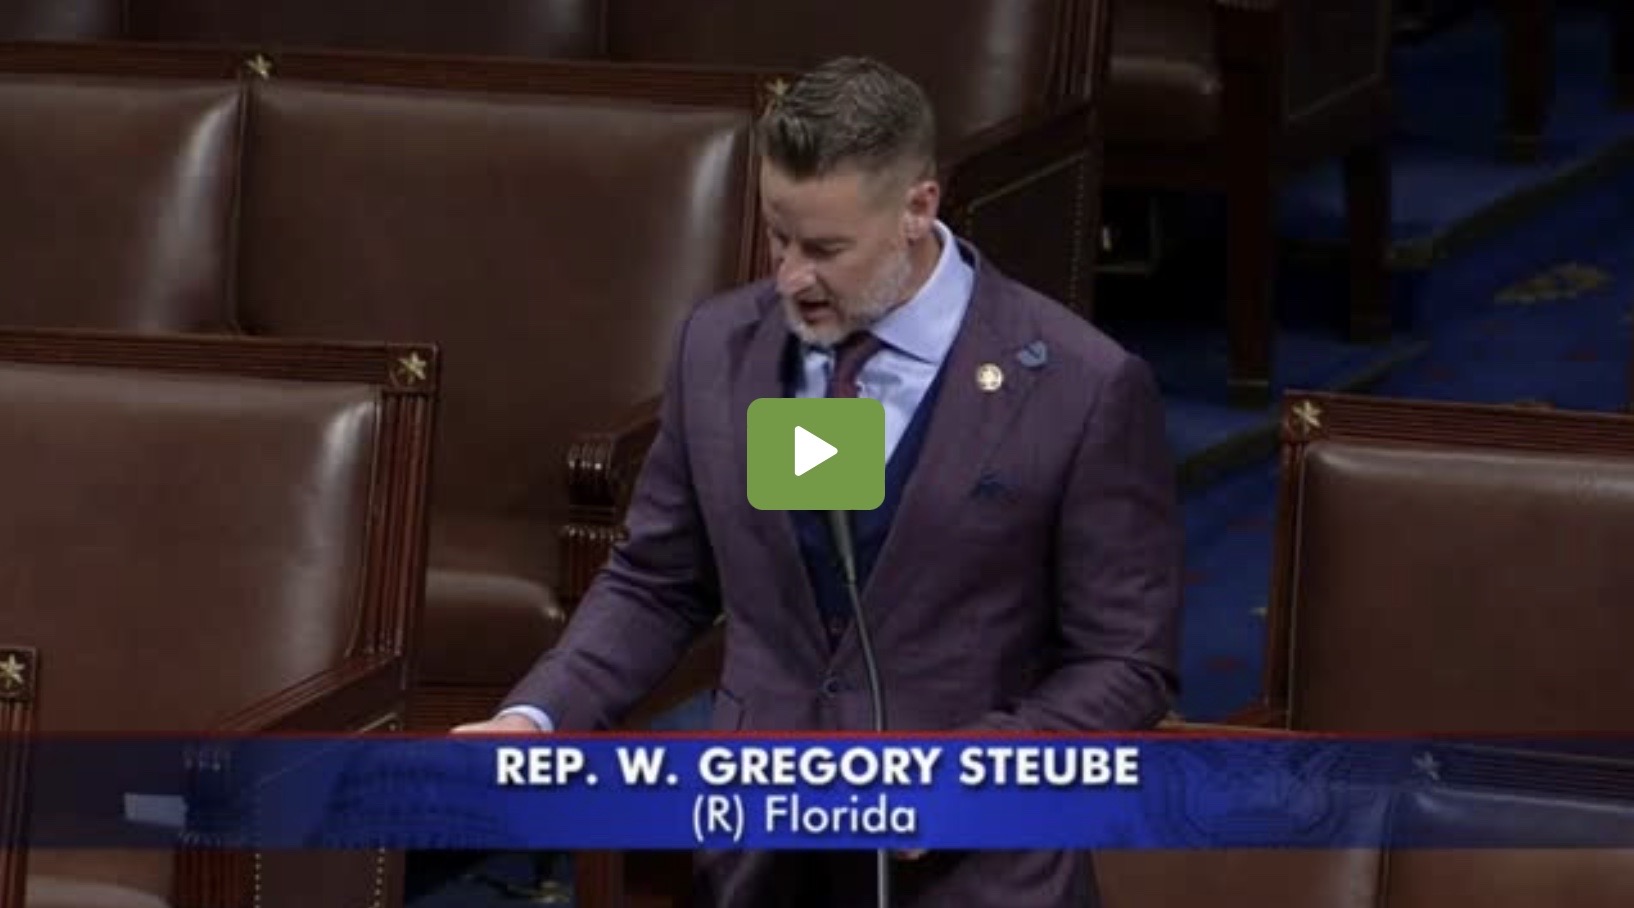 Rep. Steube on the House Floor